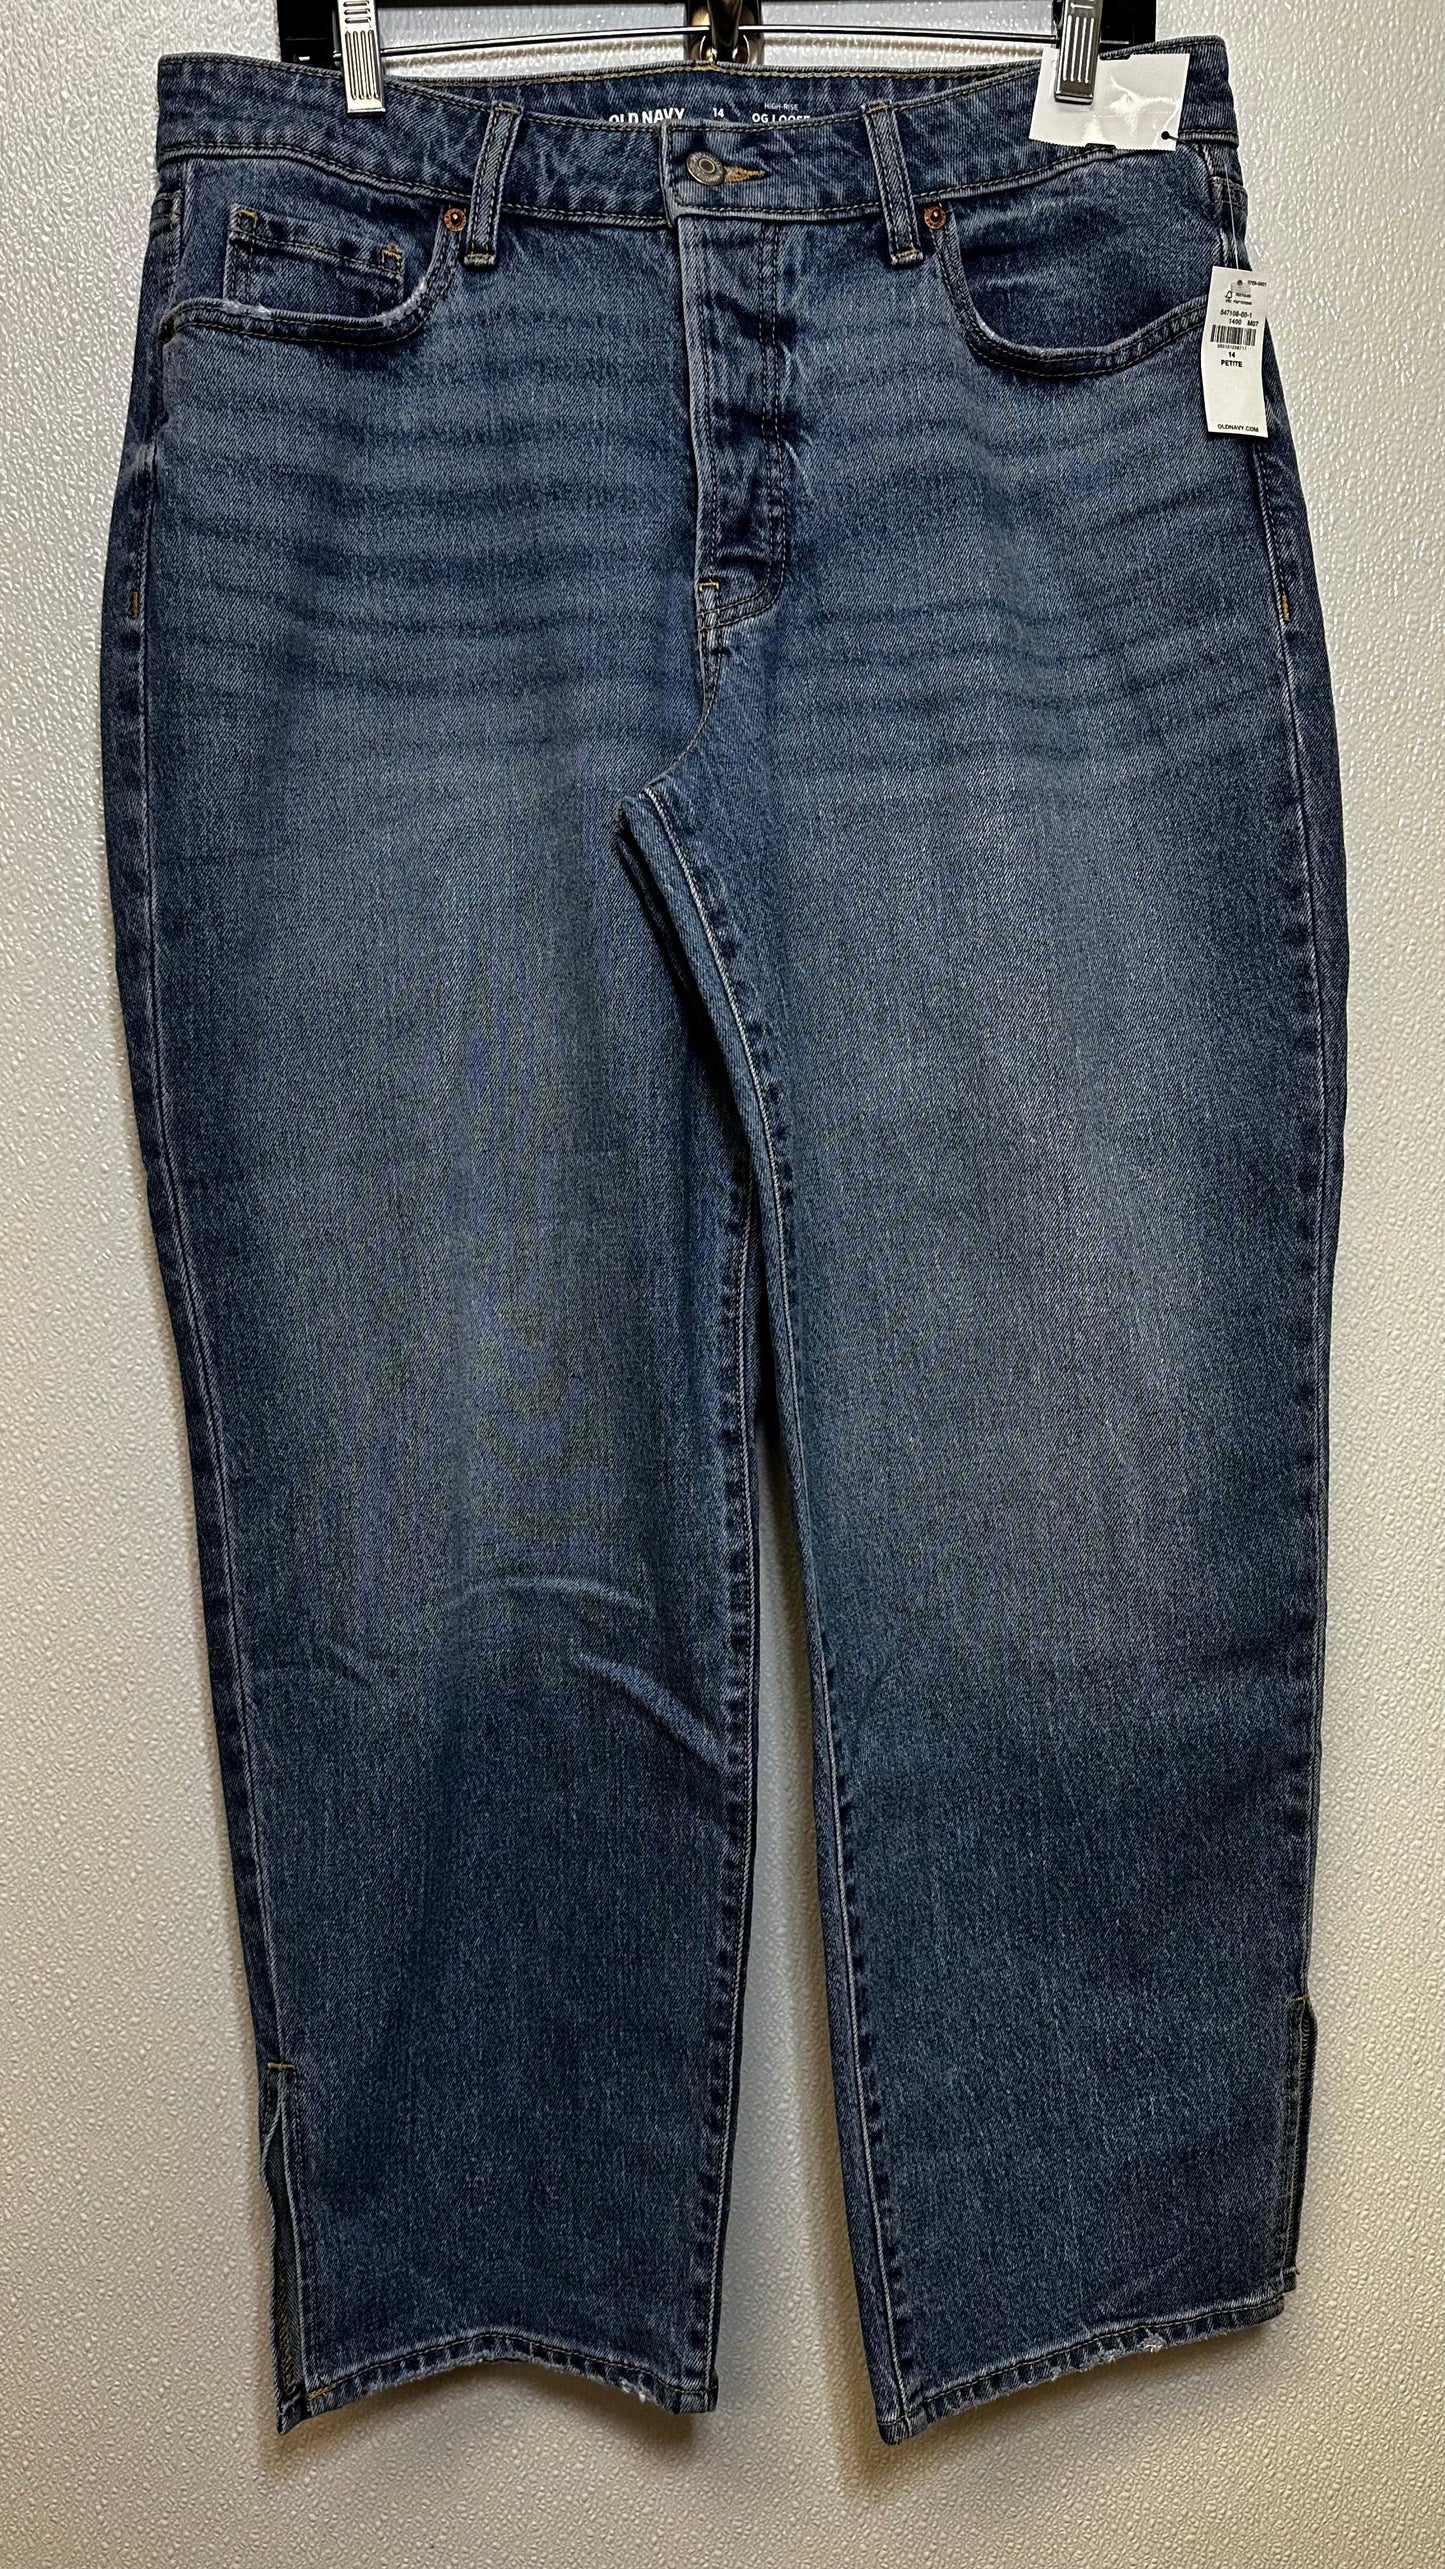 Denim Jeans Cropped Old Navy O, Size 14petite